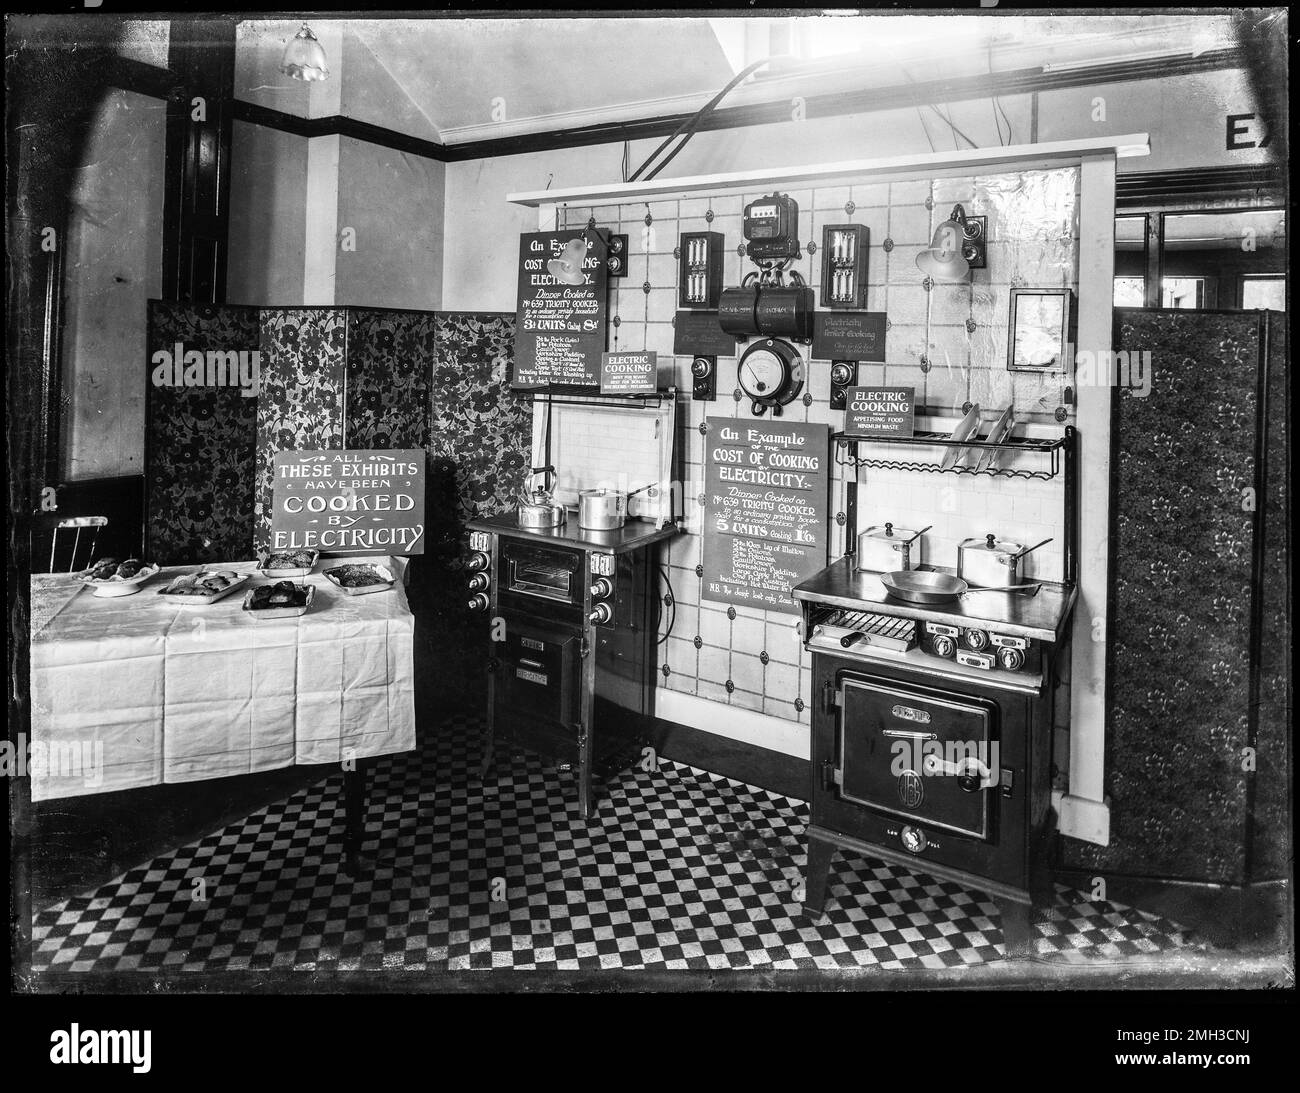 Historical Cooked By Electricity exhibition of the benefits of cooking by electricity.  Believed to have been at the 1924 British Empire Exhibition.  Black & white archive photograph from original full plate glass negative. Stock Photo